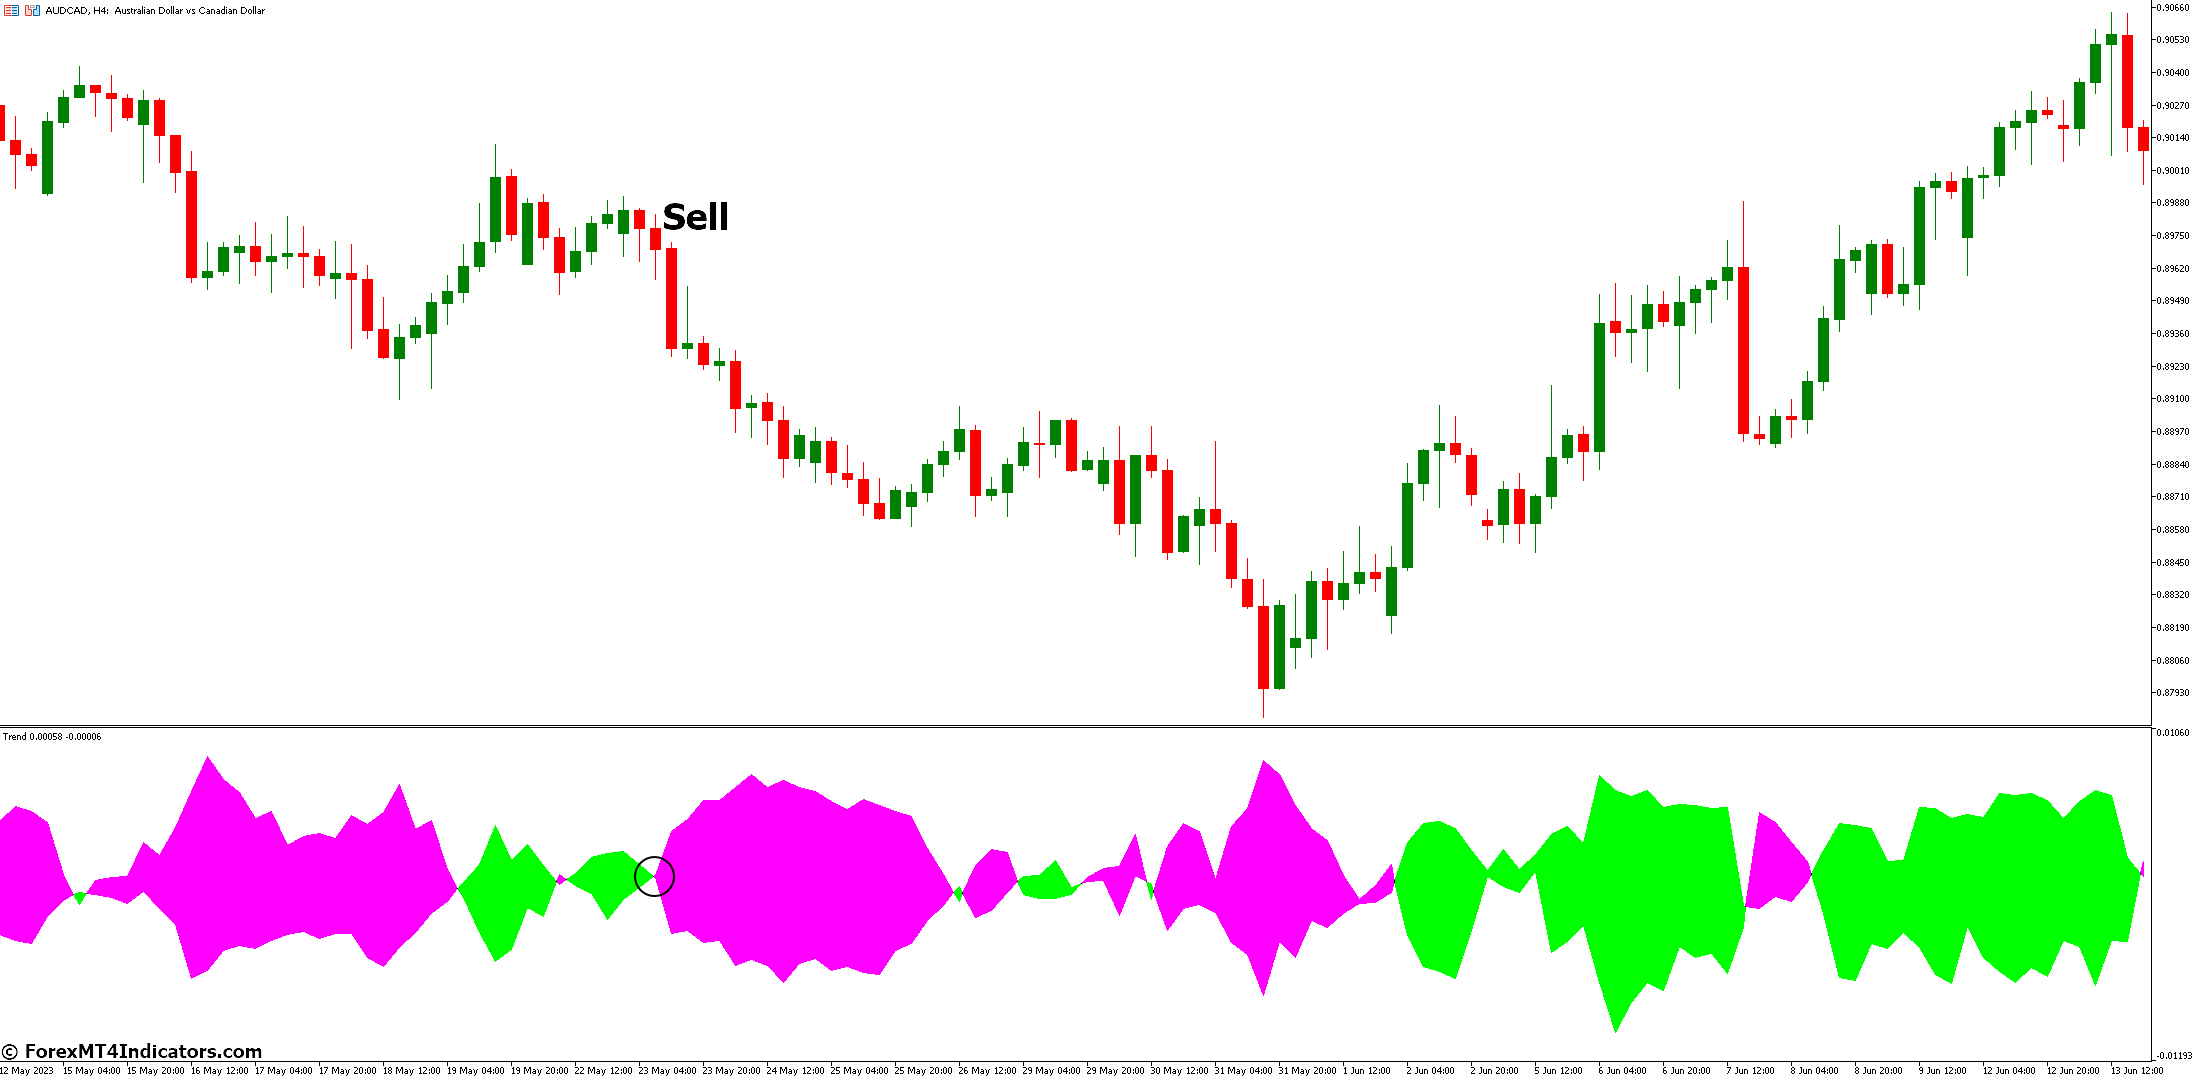 How to Trade with Trend Envelopes Indicator - Sell Entry